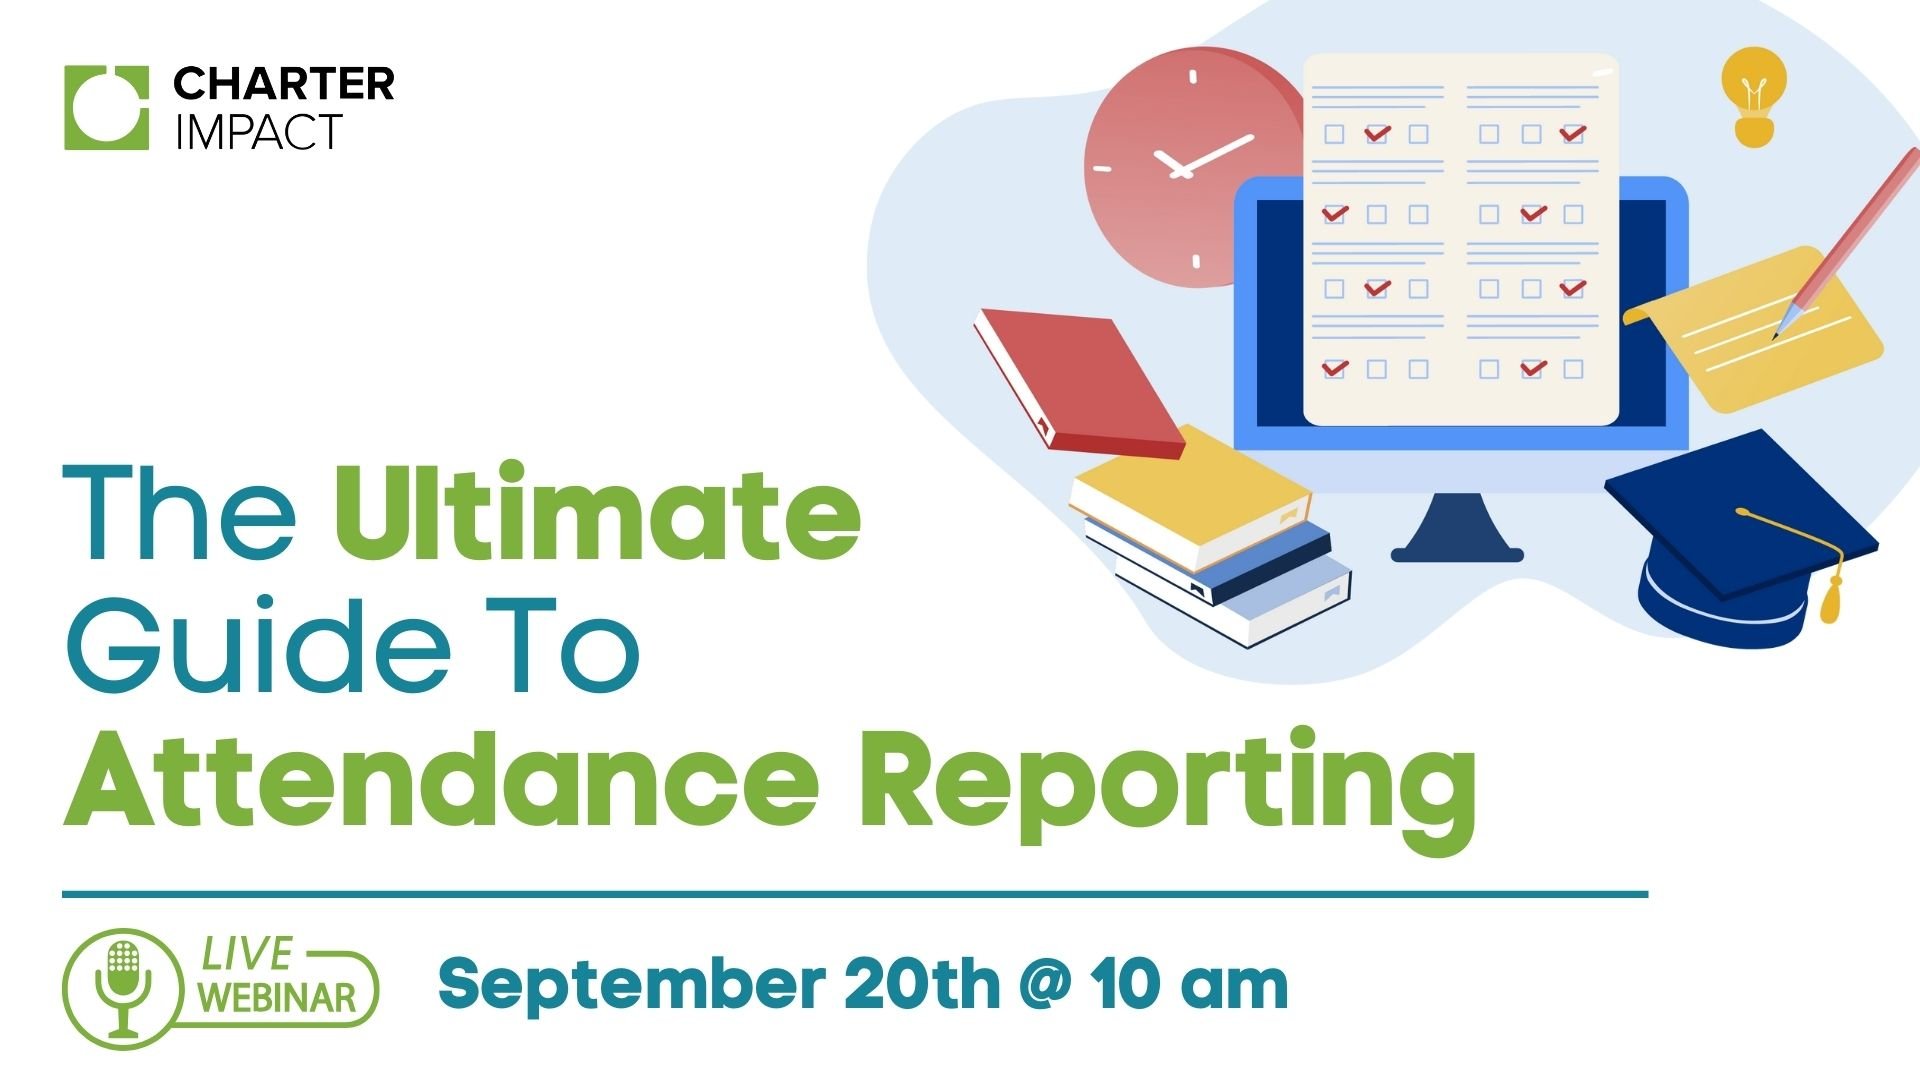 The Ultimate Guide to Attendance Reporting